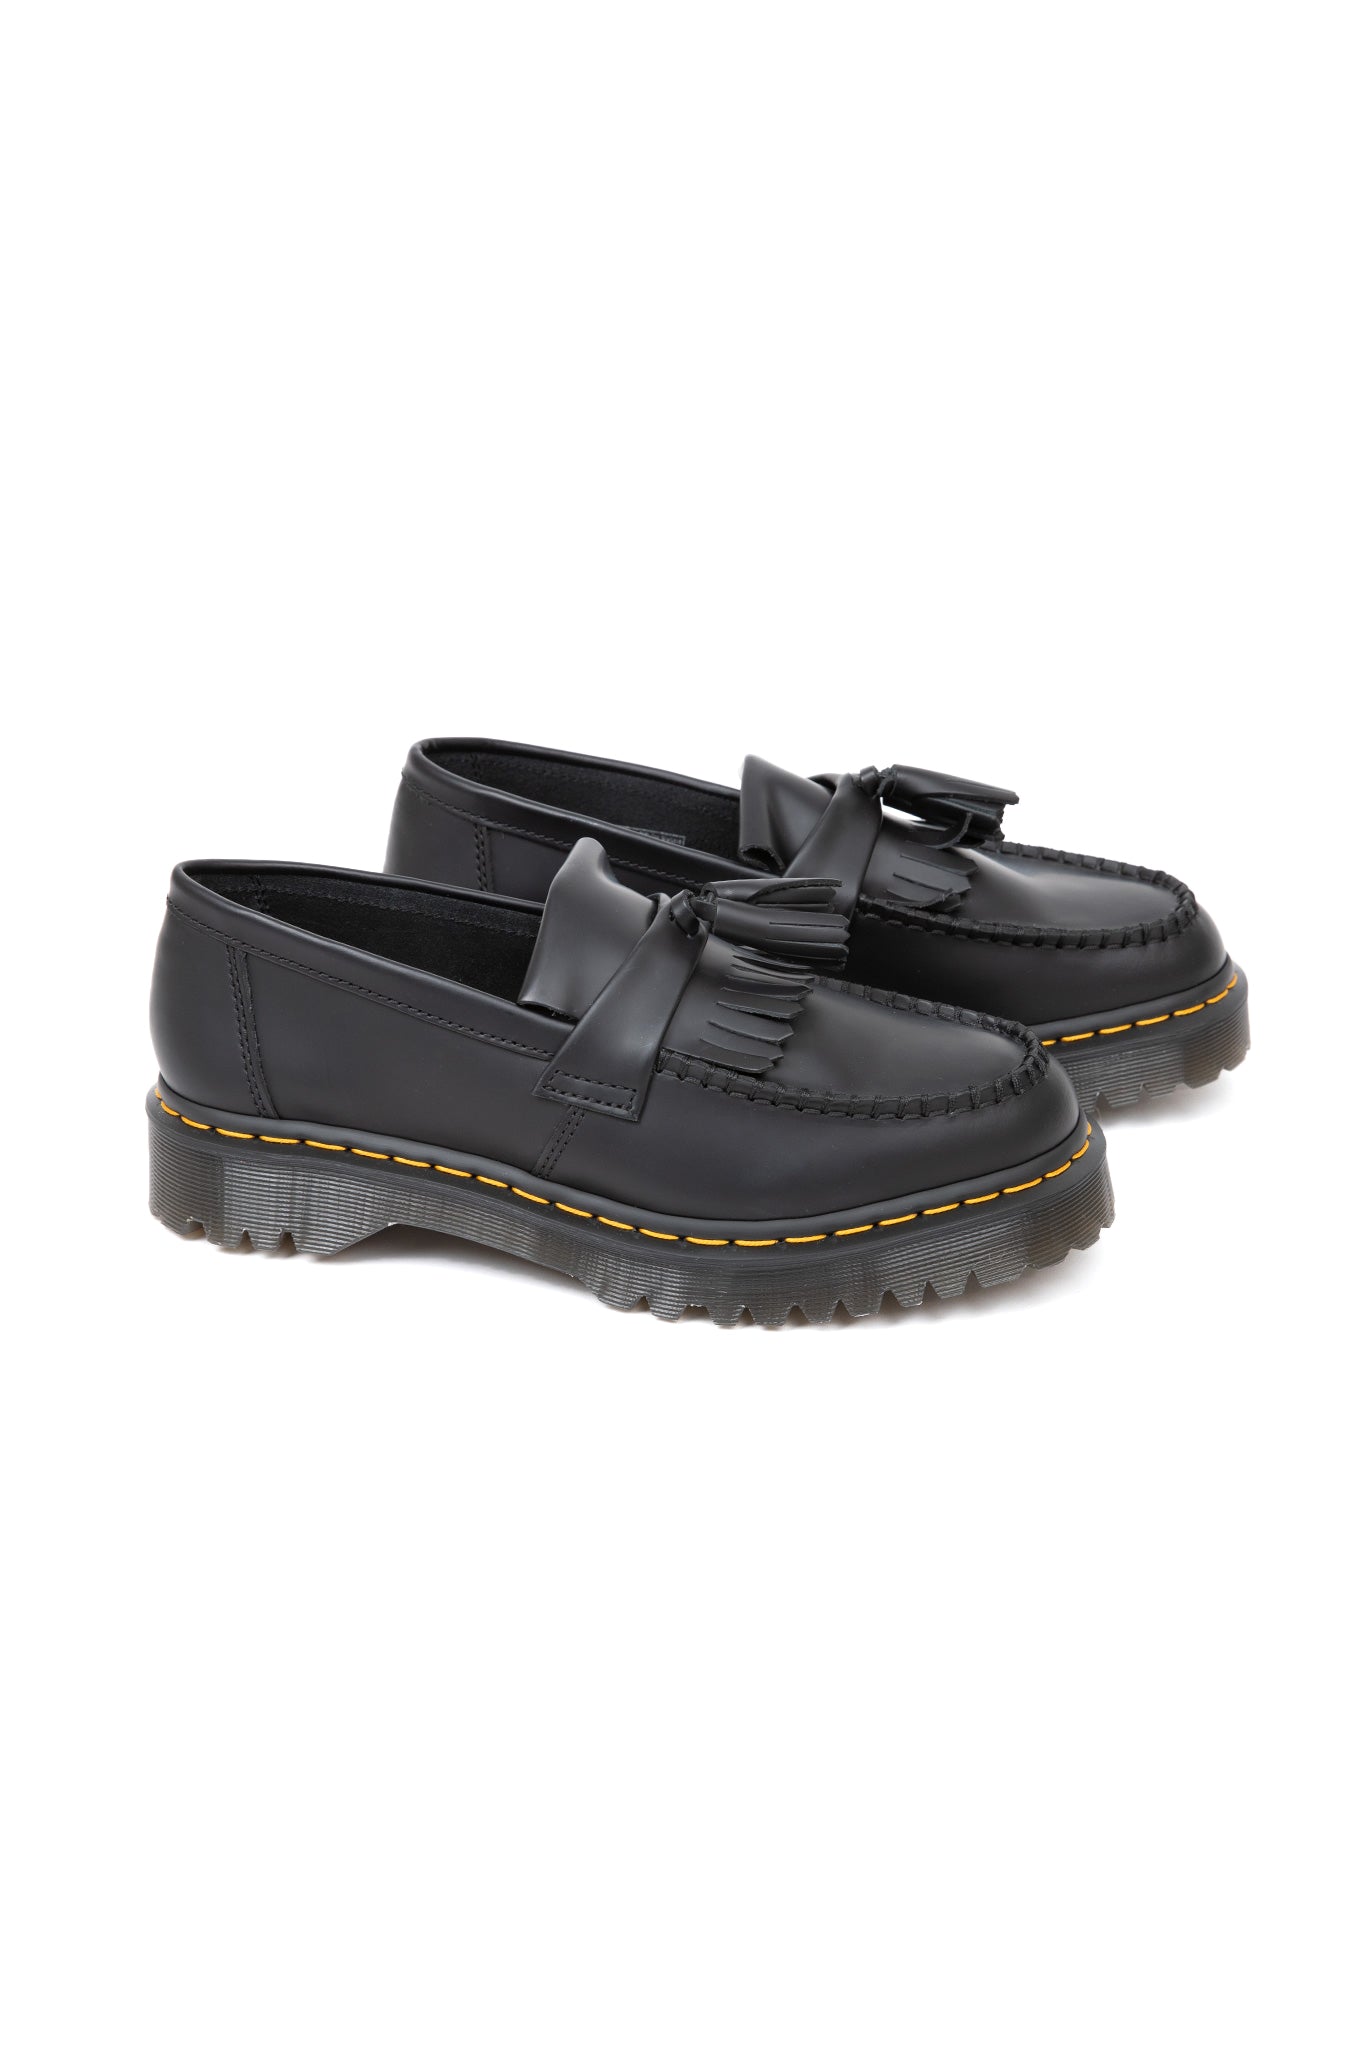 Adrian Bex Smooth Leather Tassel Loafers Footwear Dr. Martens   